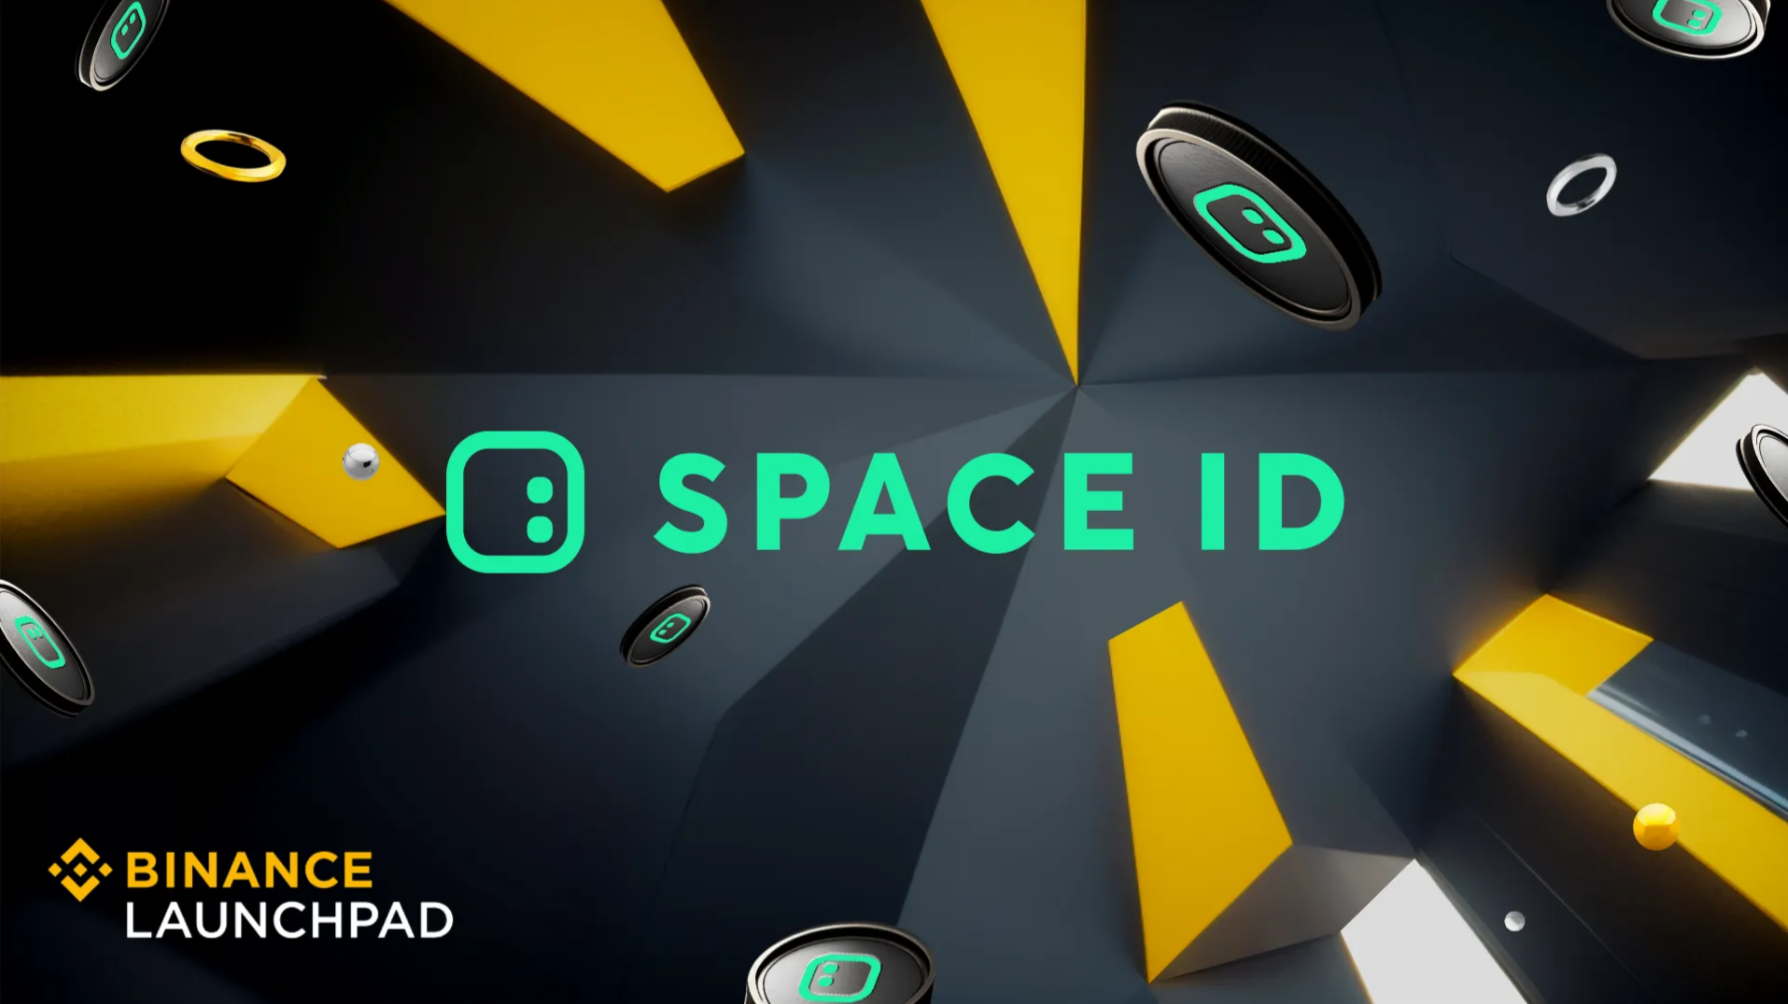 Https space id